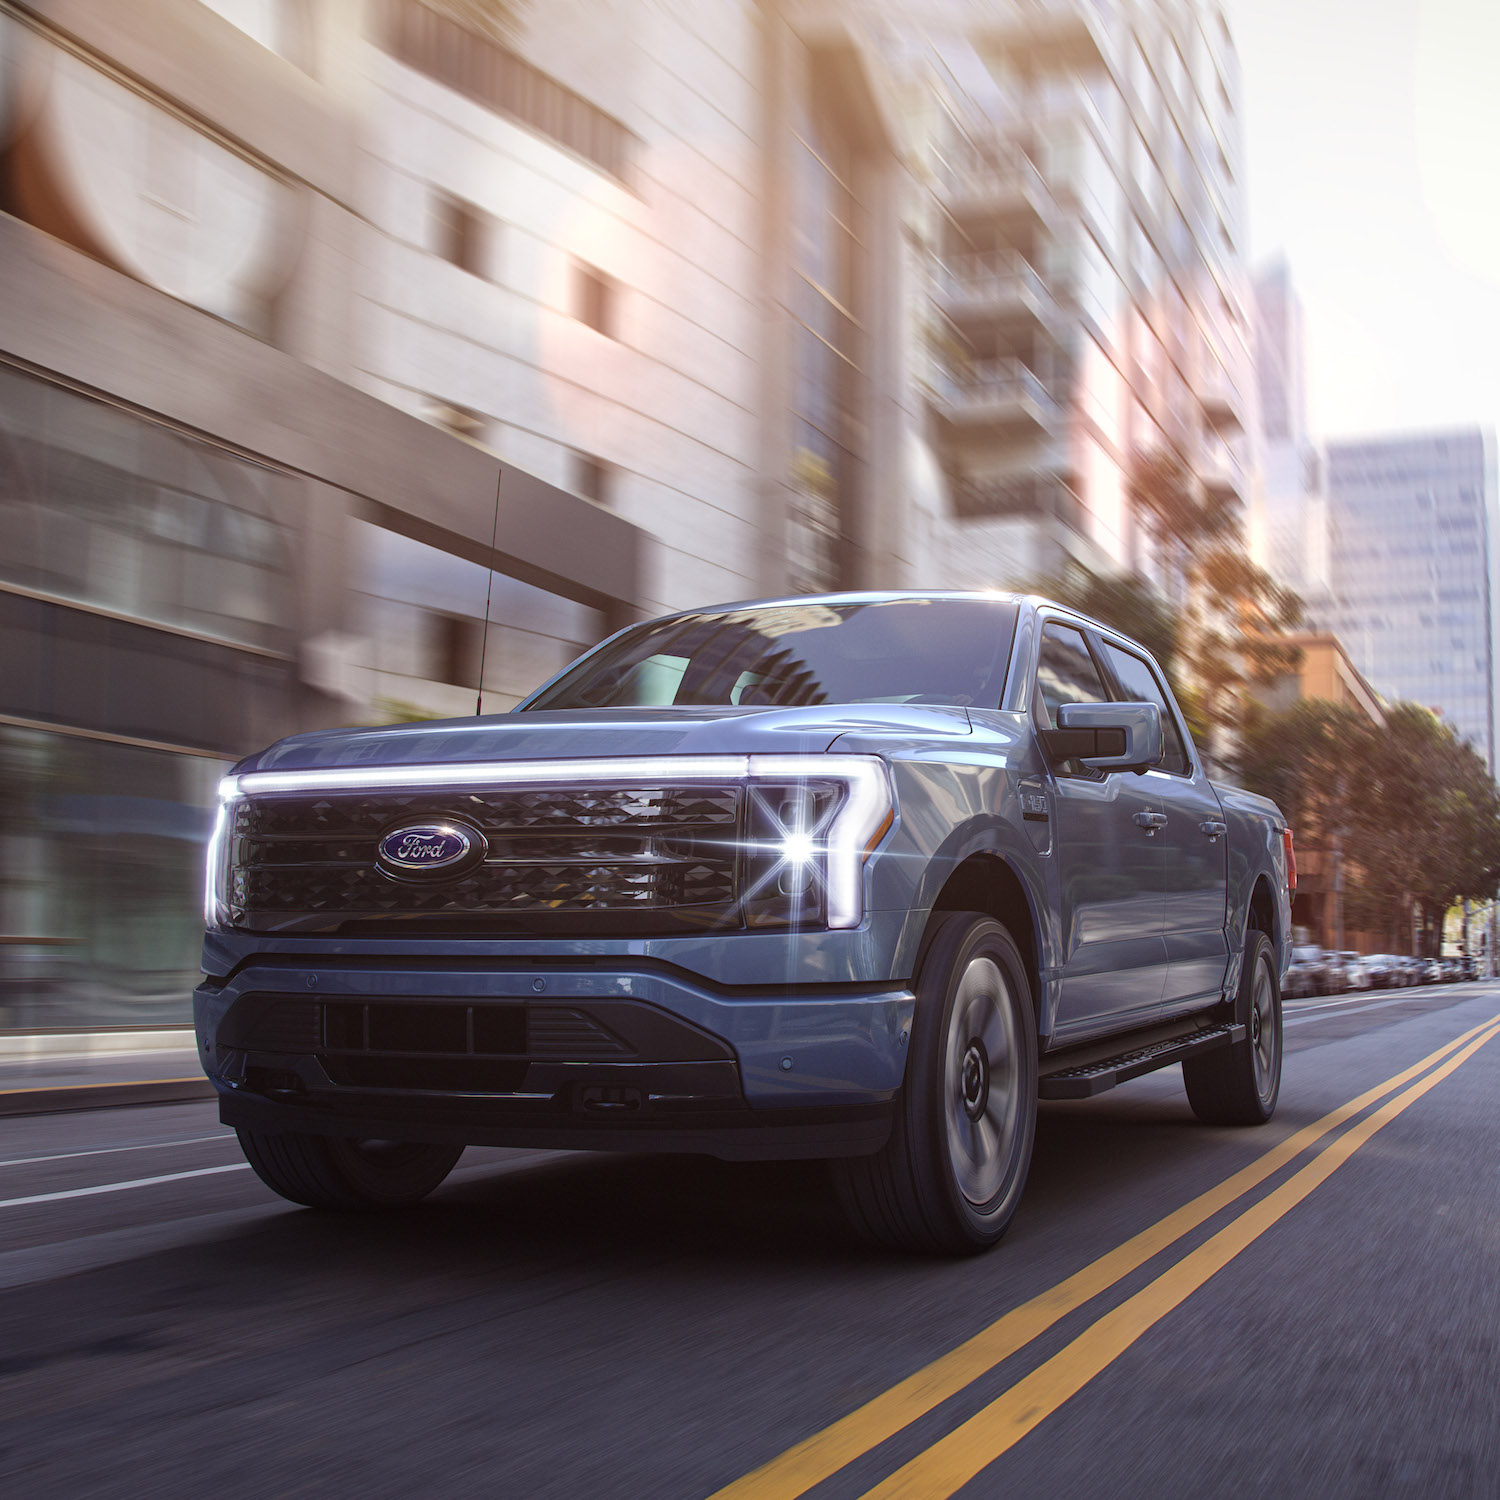 2022 Ford F-150 Lightning electric pickup truck.